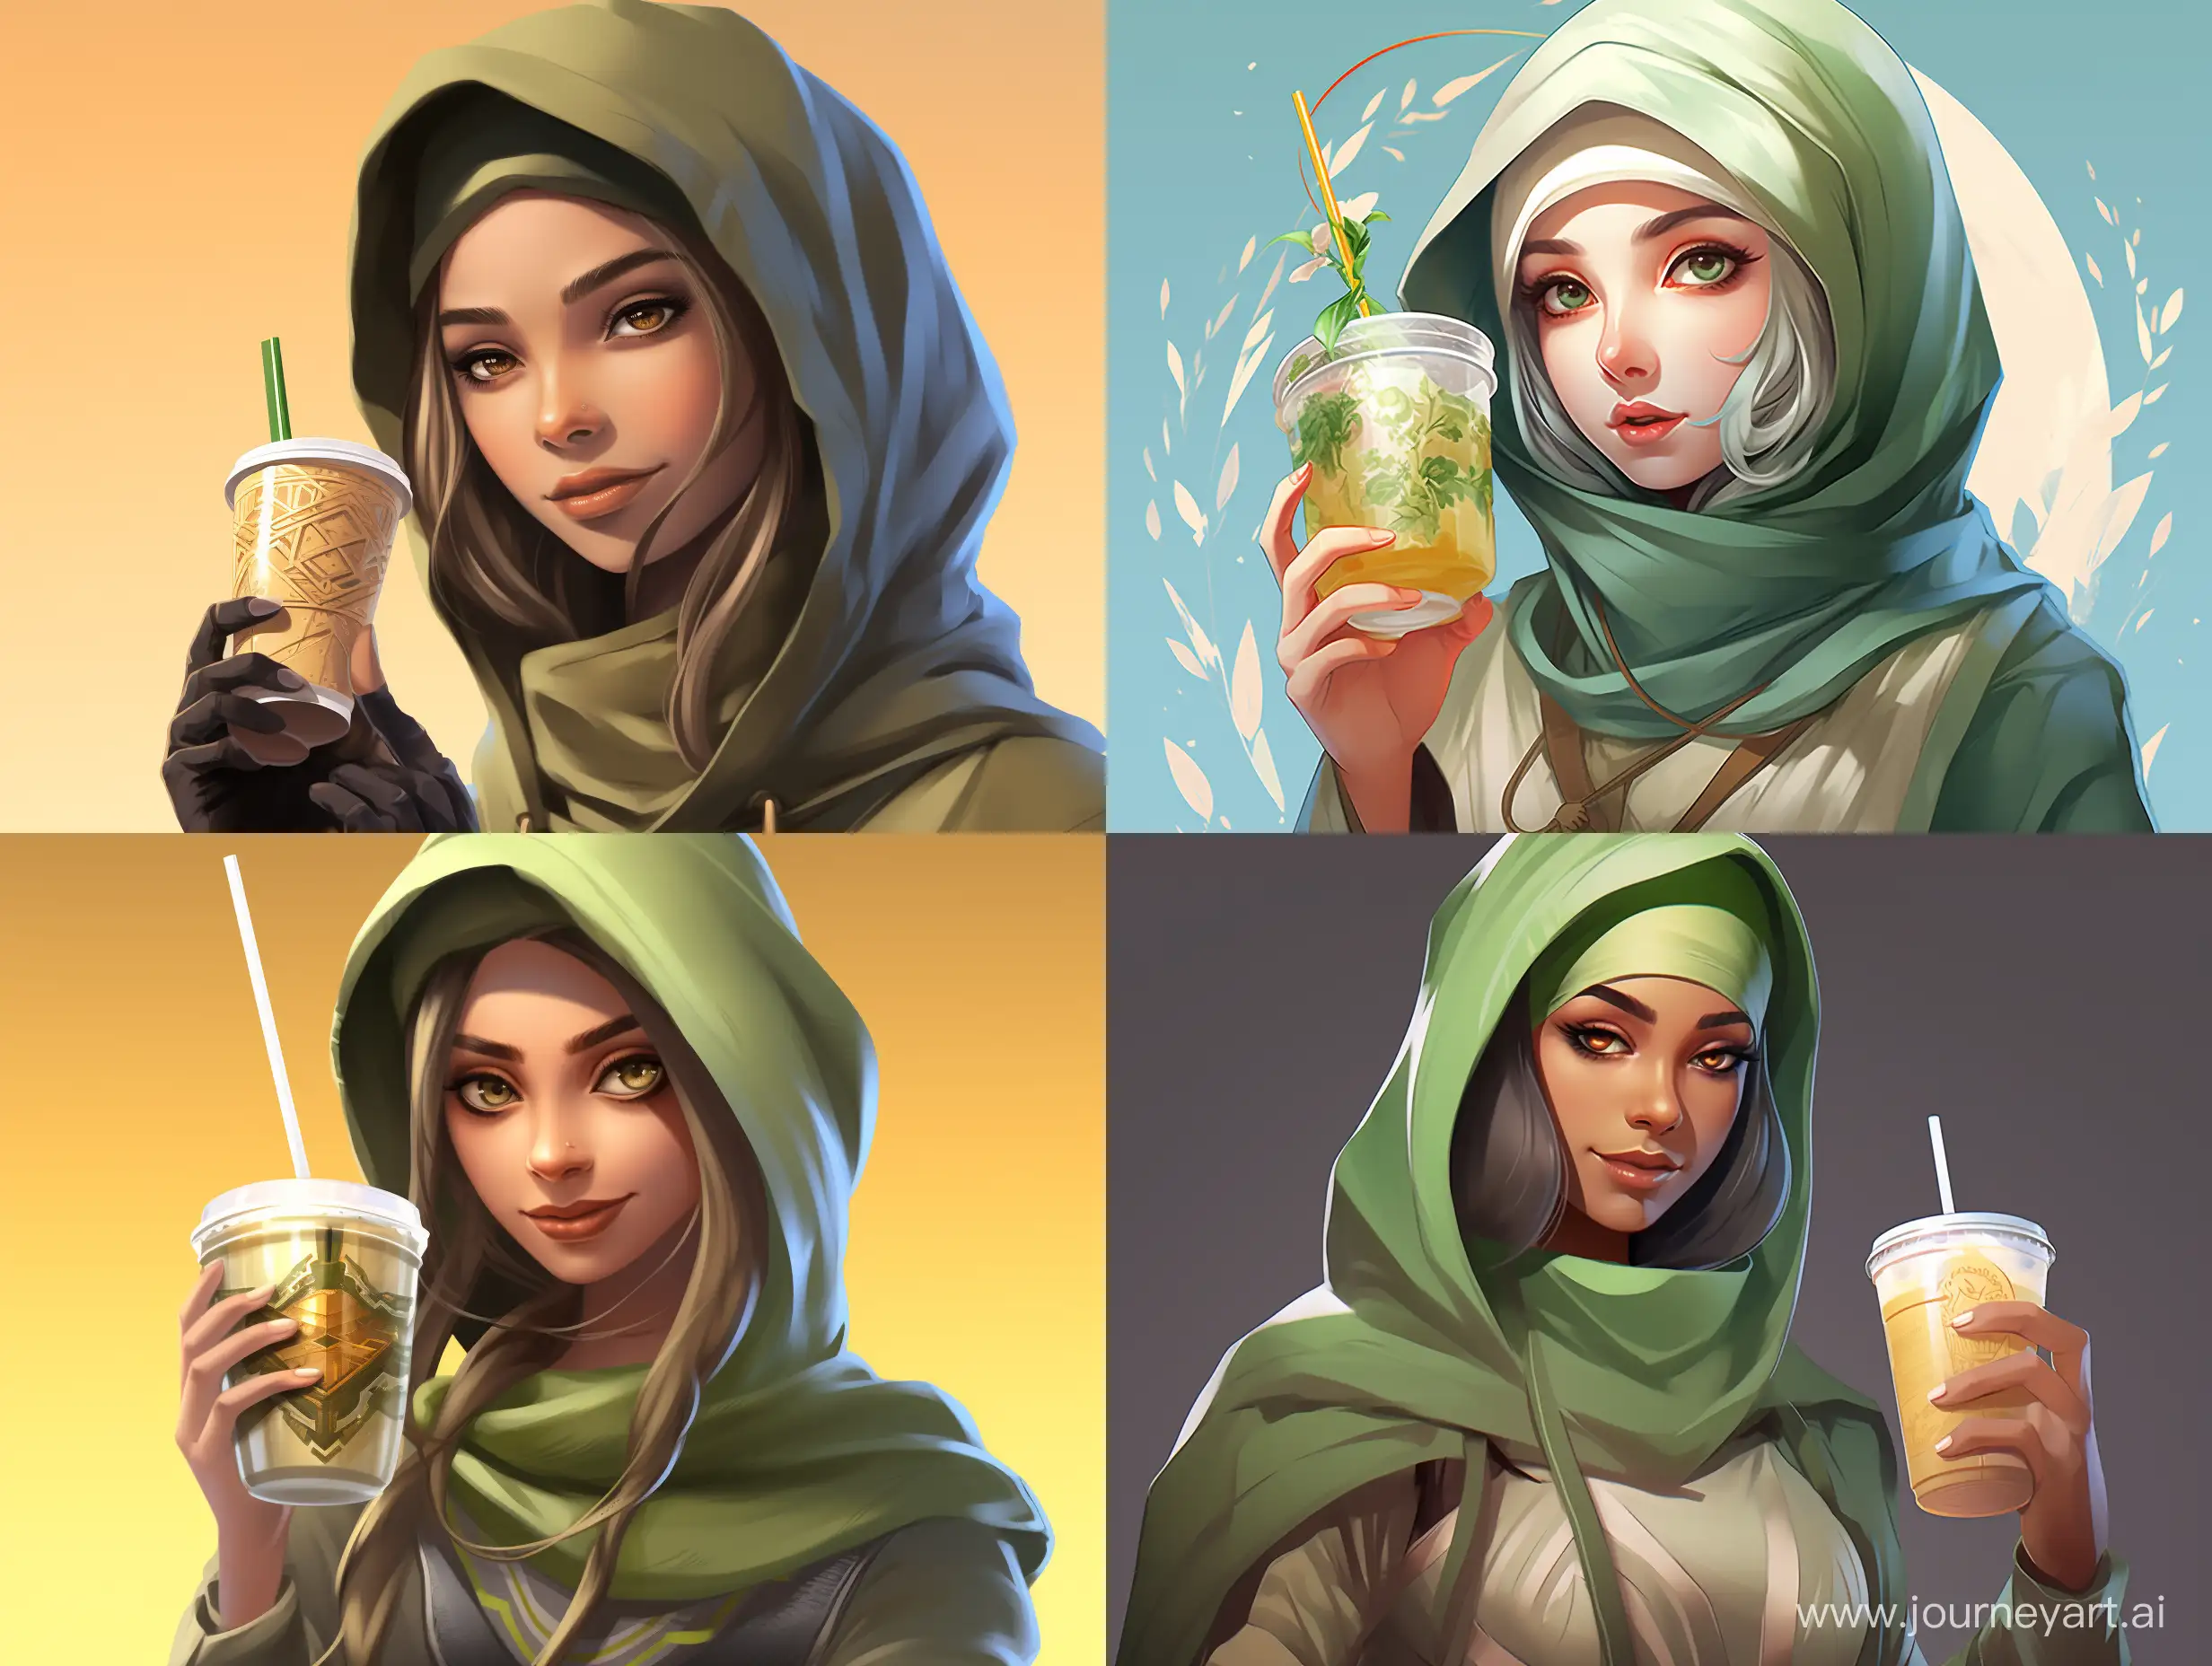 a woman in hijab holding a glass of green tea, aesthetic!!!!!! female genie, zenra taliyah, trendin on artstation, official artwork, telegram sticker design, fanart, it idn't greasy, godesses, official fanart, telegram sticker, genius design, trending artgerm, sticker design, 2 d render, official fanart behance hd, official illustration